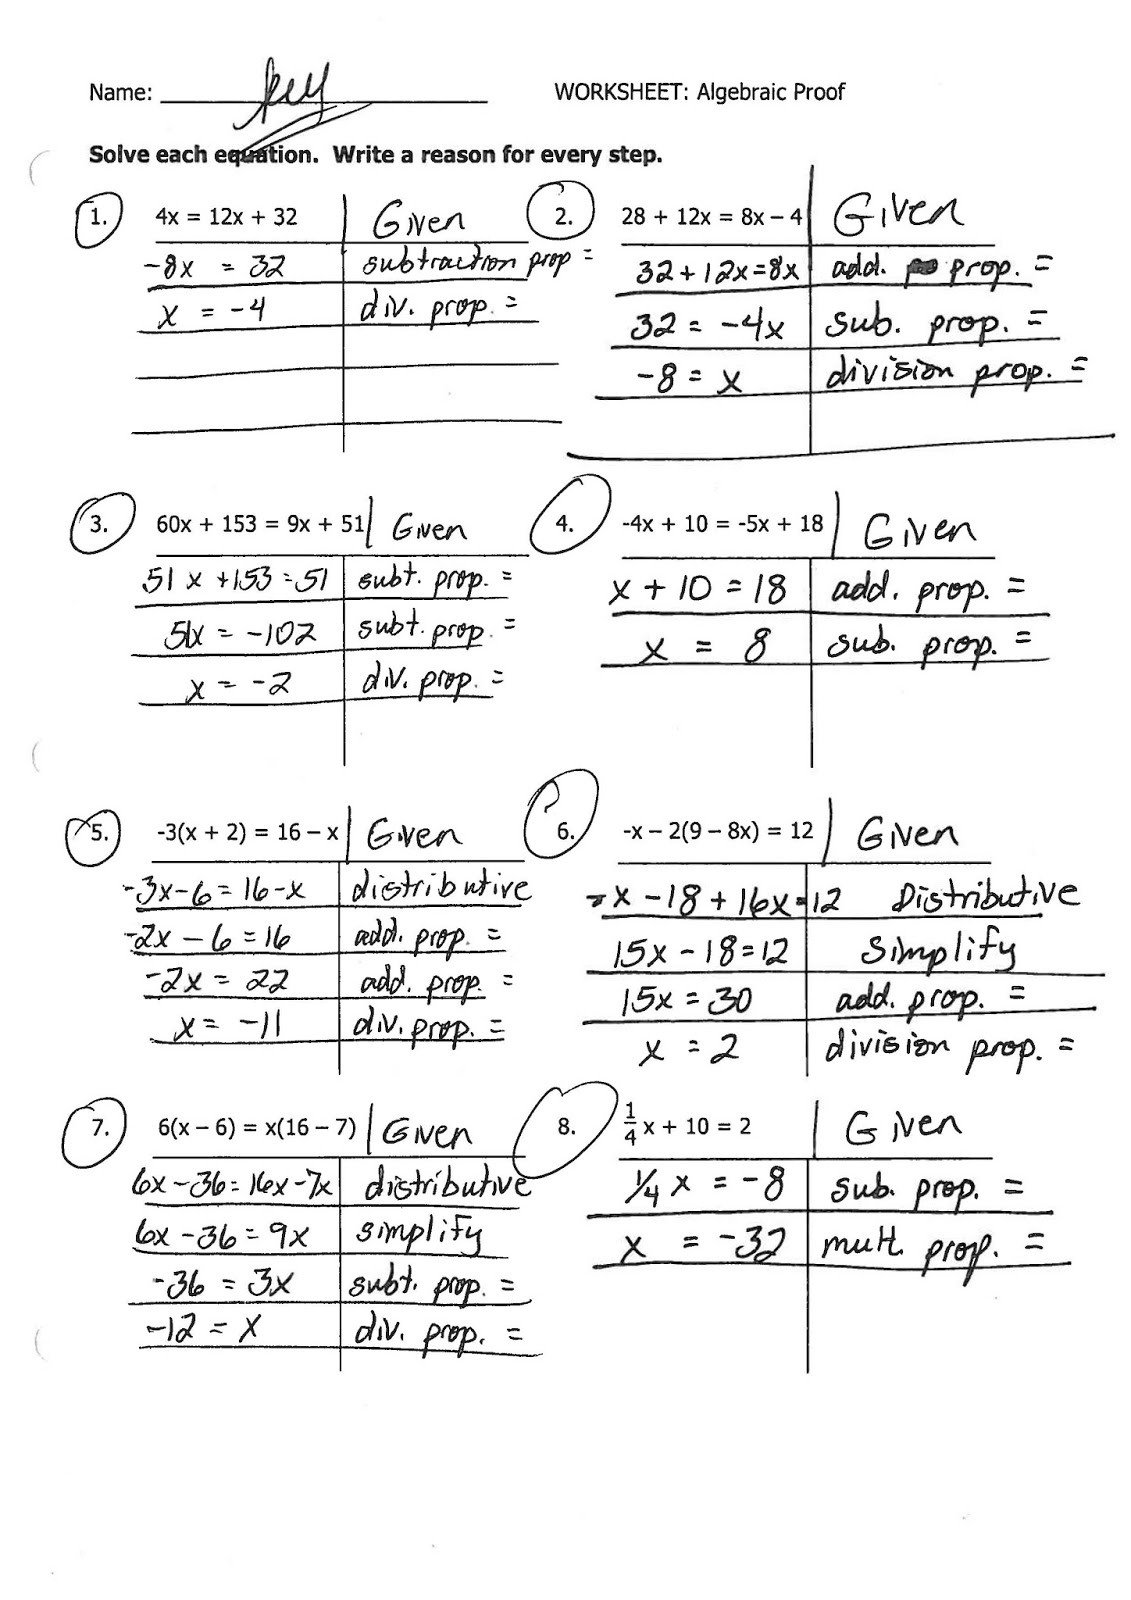  Algebraic Proofs Worksheet With Answers Db excel